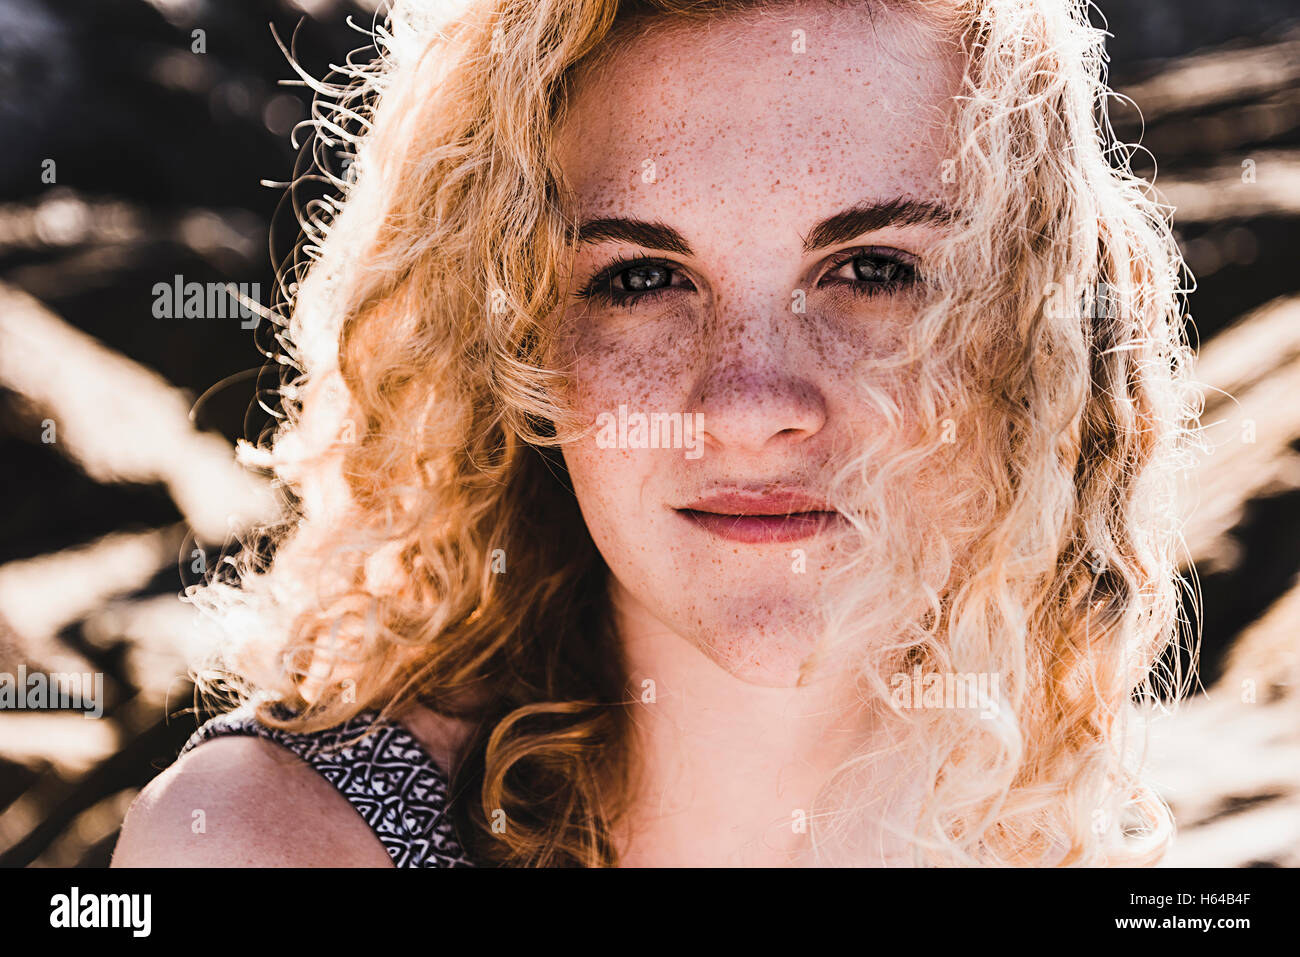 Portrait of teenage girl with freckles Stock Photo